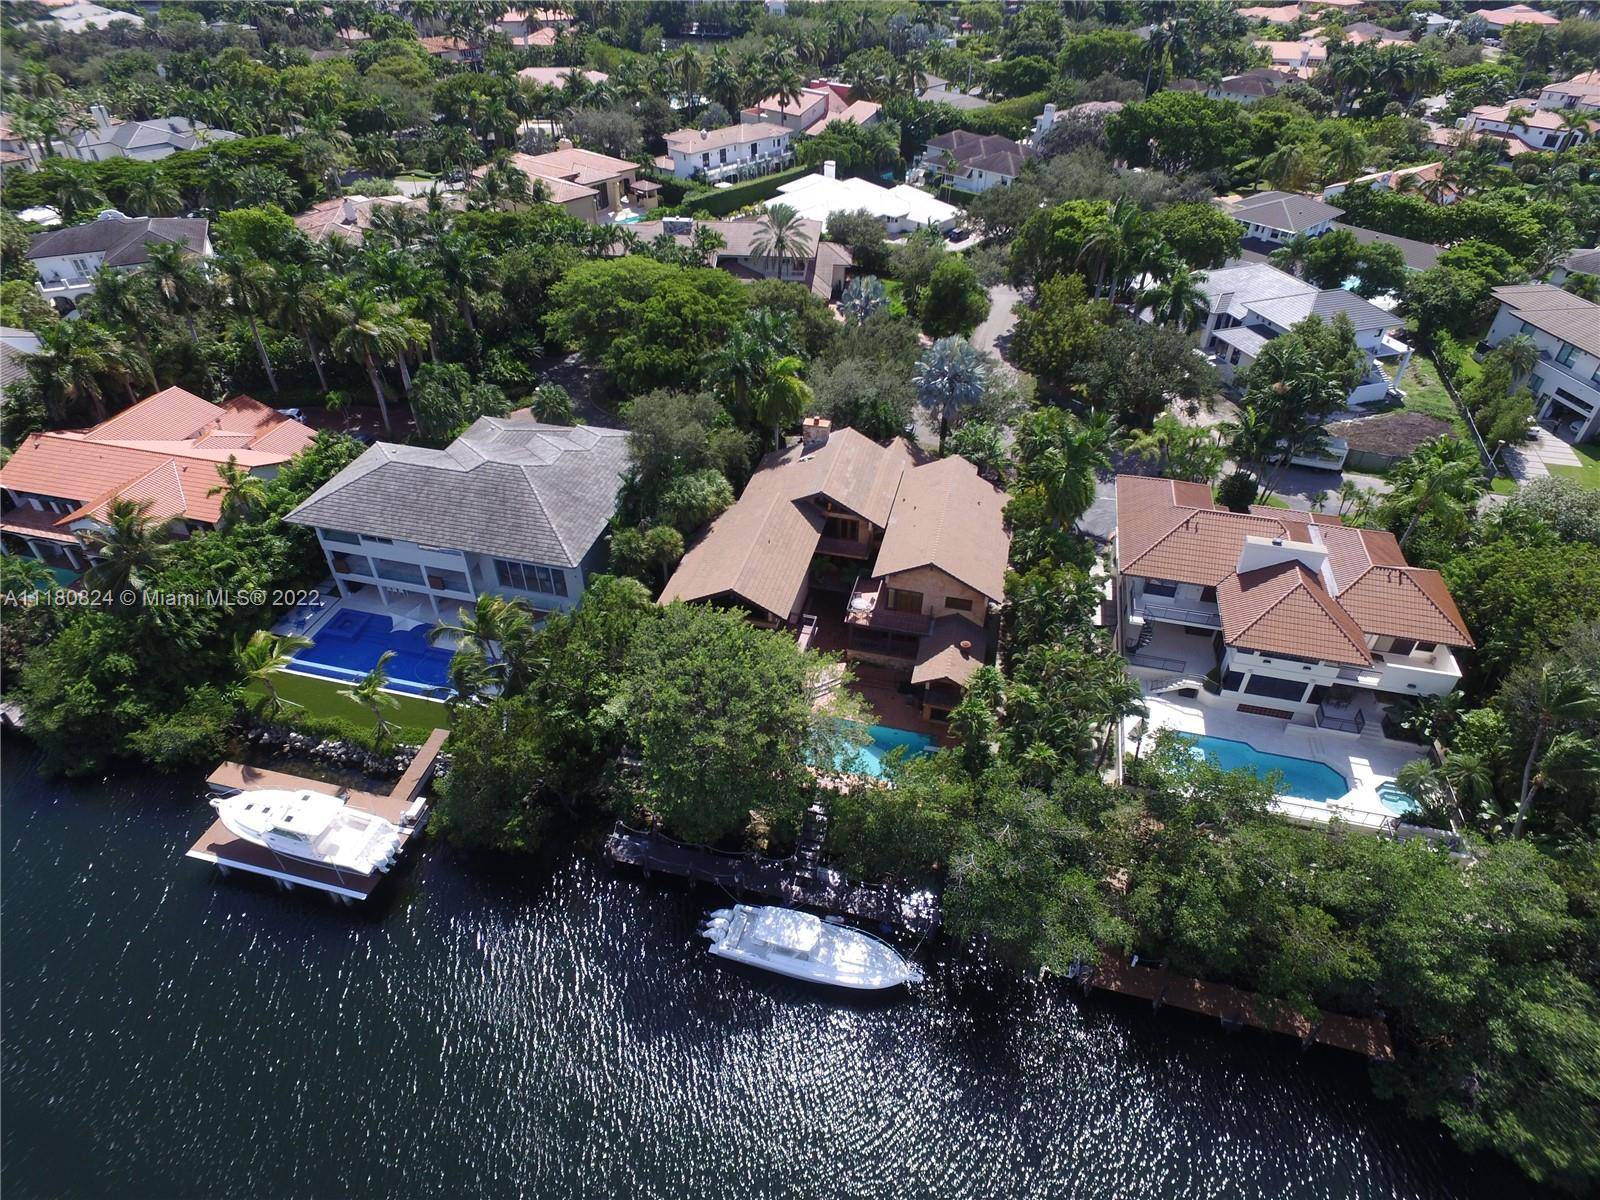 Yachtsman's dream home with 100 feet of waterfront, complete with wood dock and NO bridge to bay.